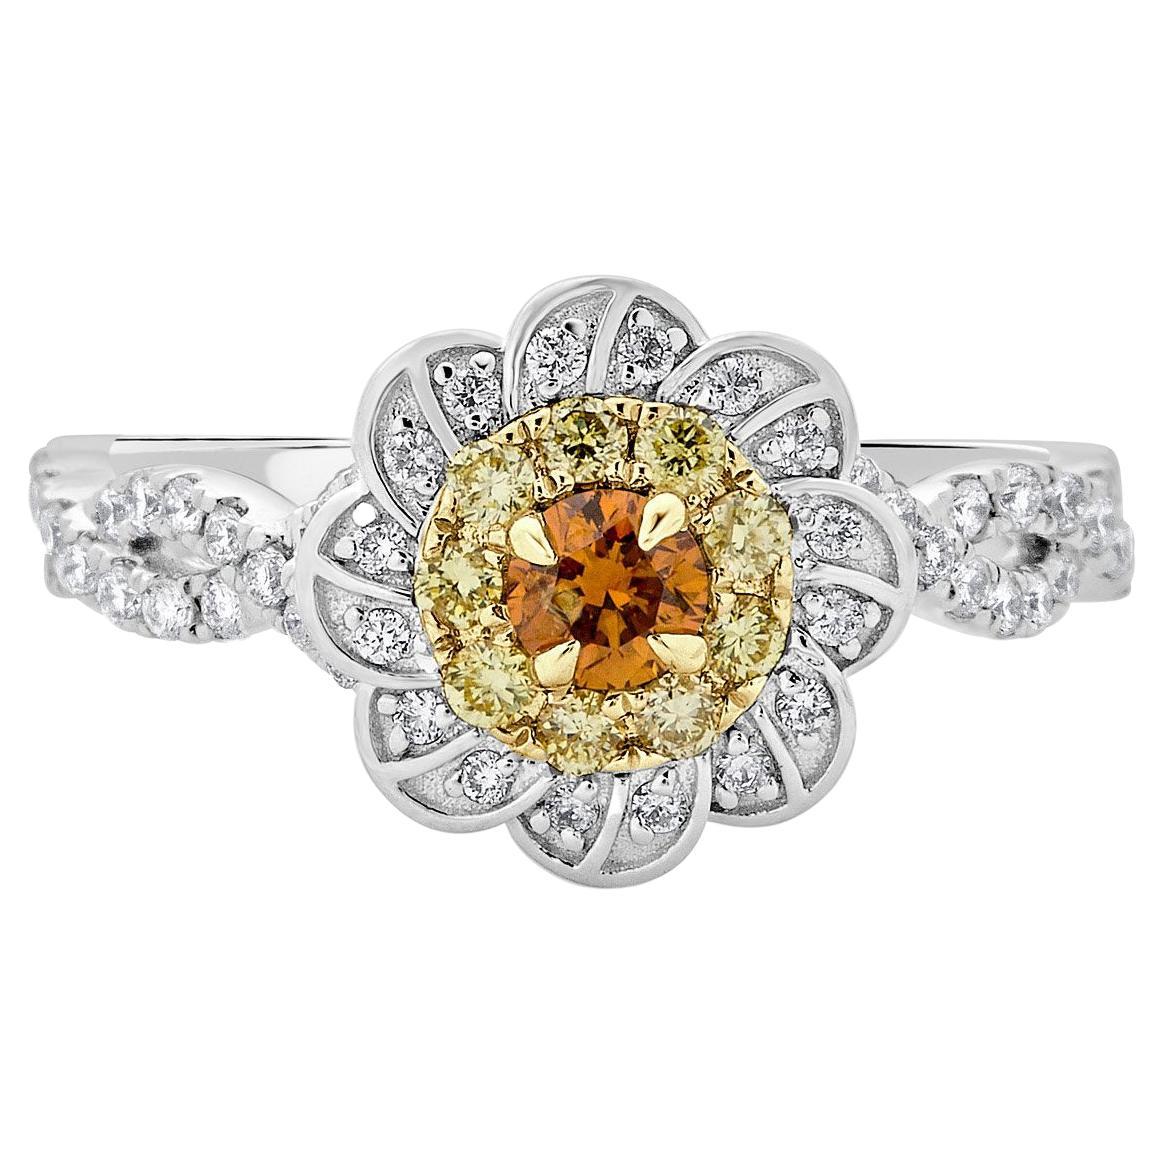 0.20ct Orange Diamond Ring with 0.57ct Diamond Accents Set in 14k Two Tone Gold